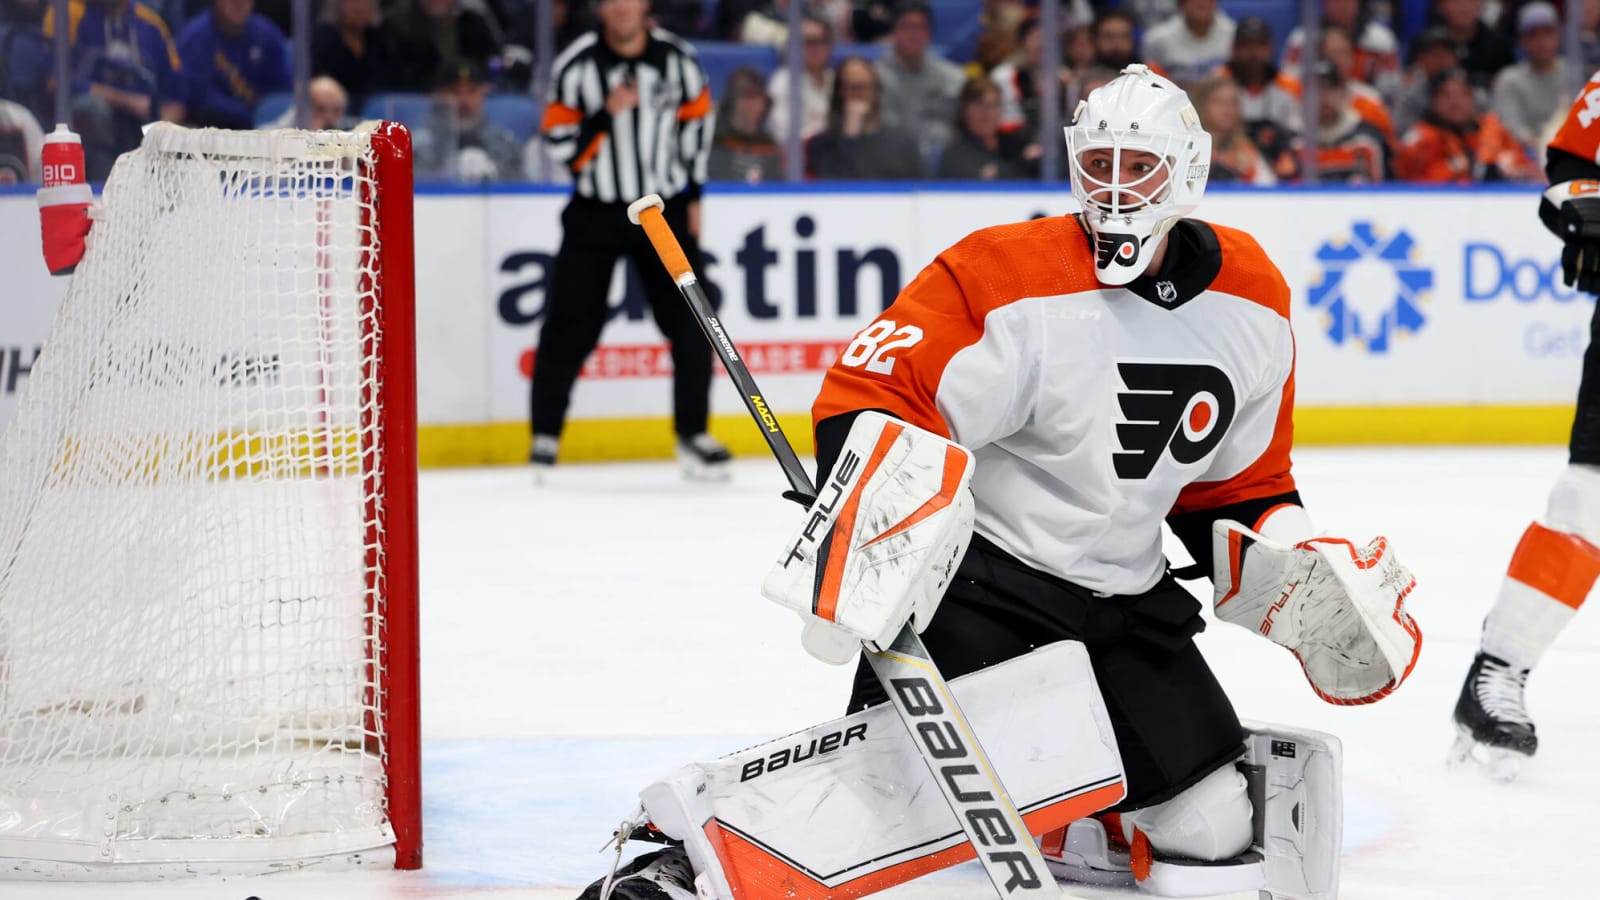 Flyers Goalie Banned from International Competitions for 3 Years